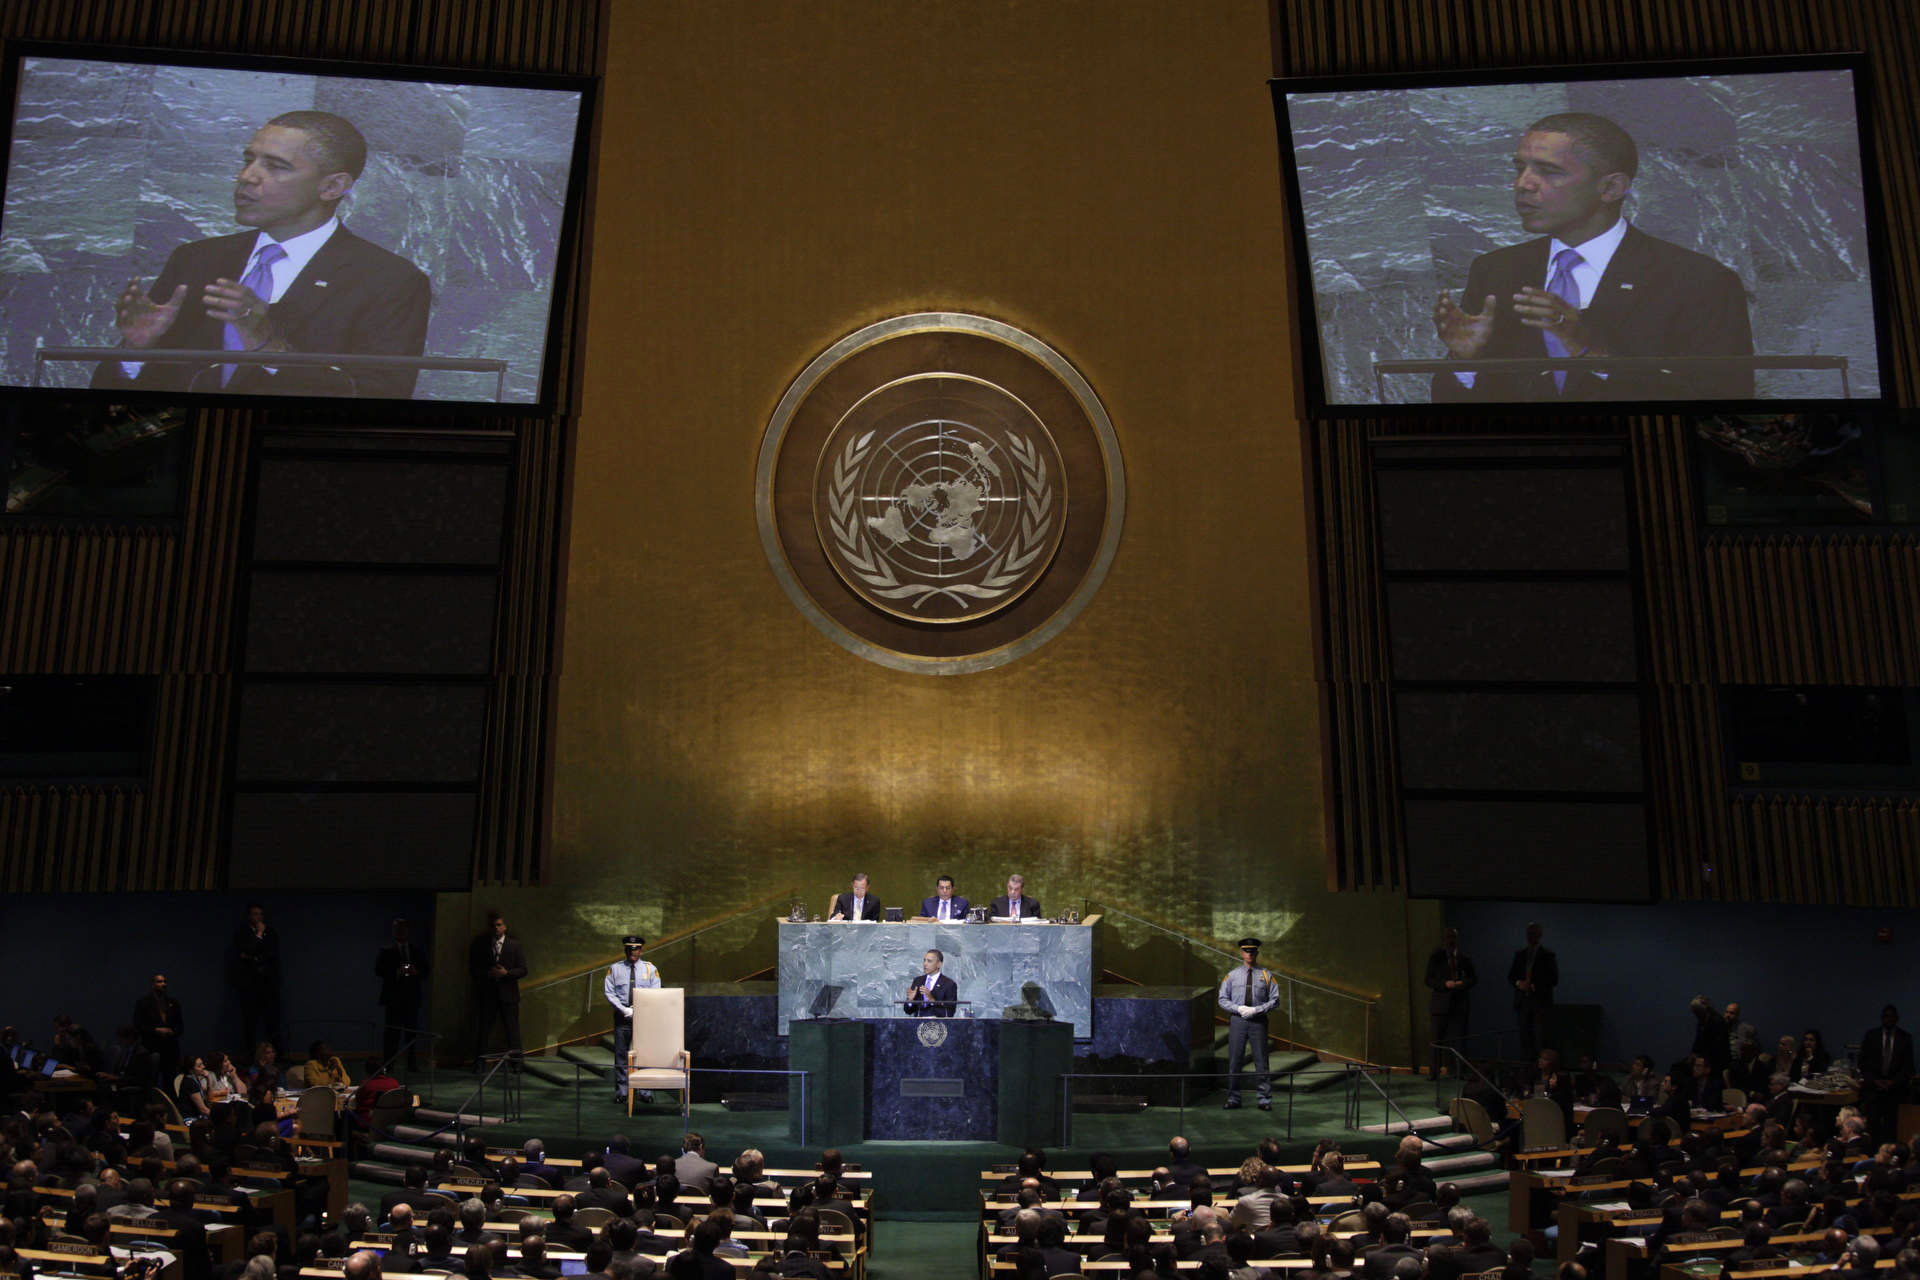 President Obama to the U.N. General Assembly "Peace Is Hard, but We